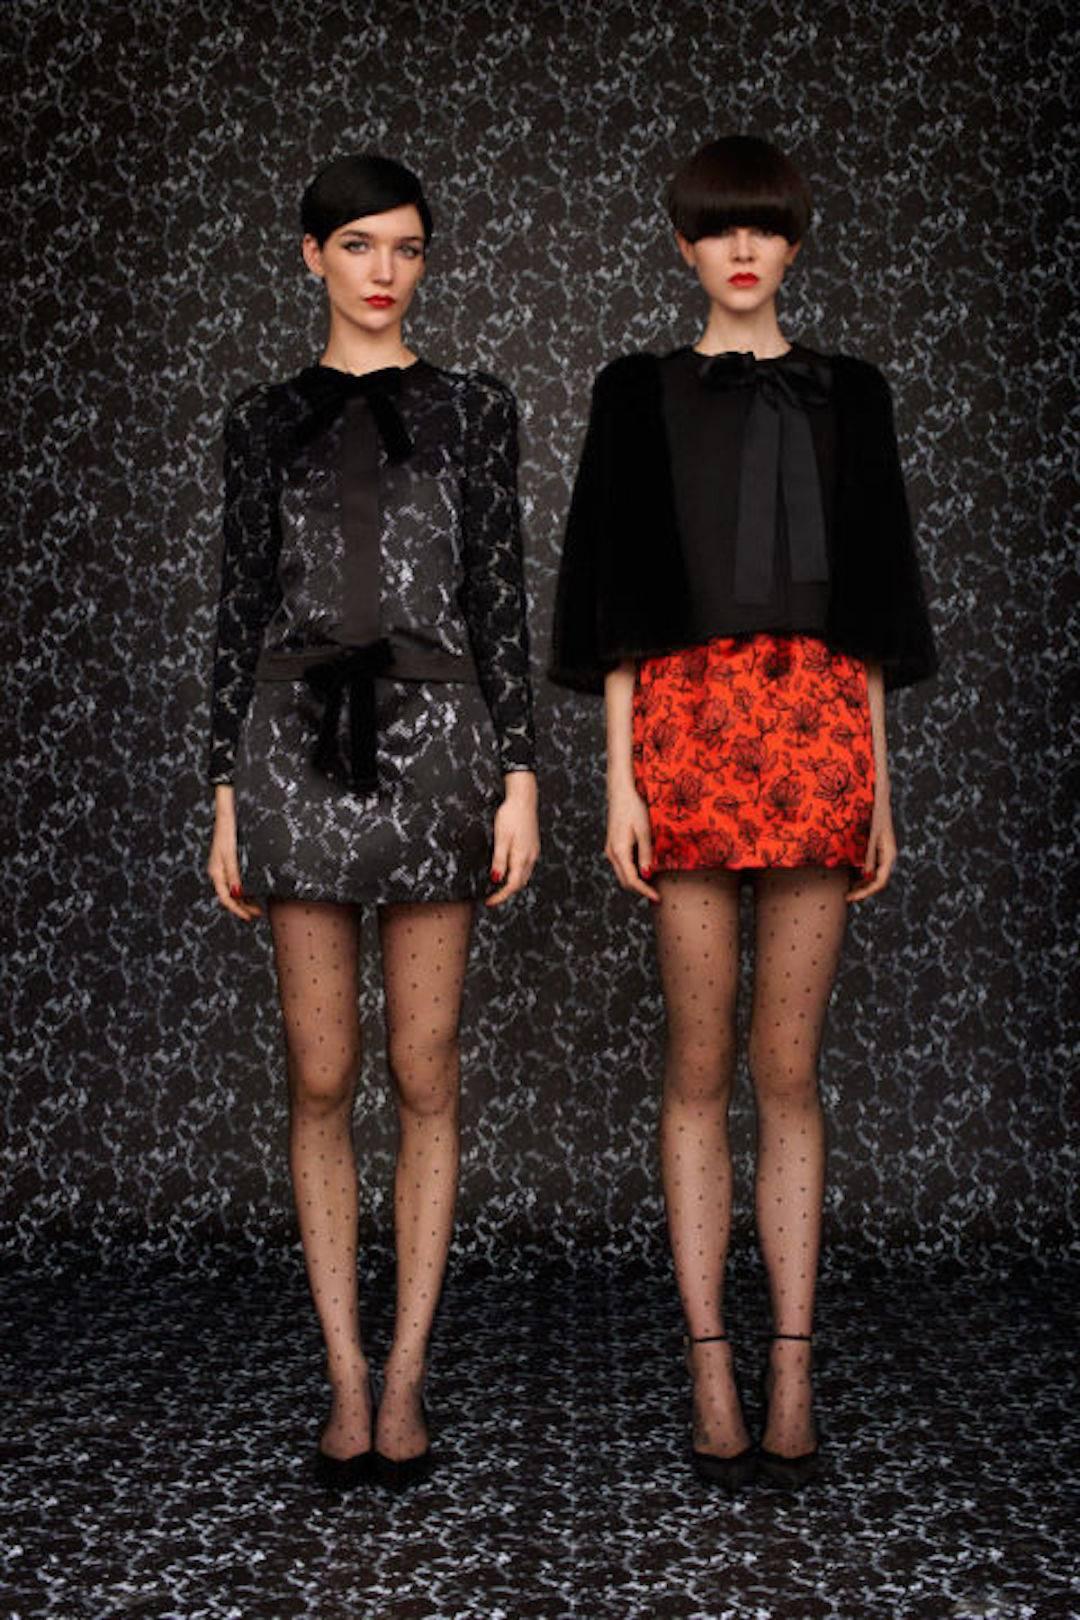 CURATOR'S NOTES

Louis Vuitton NEW Runway Black Lace Jacquard Evening Cocktail Skirt Jacket Suit  

- Jacket - 
Velvet bow accents at front
Floral knit jacquard 
Lace print panels at front
Logo snap closures at front
Fabrication 48% Wool, 29%